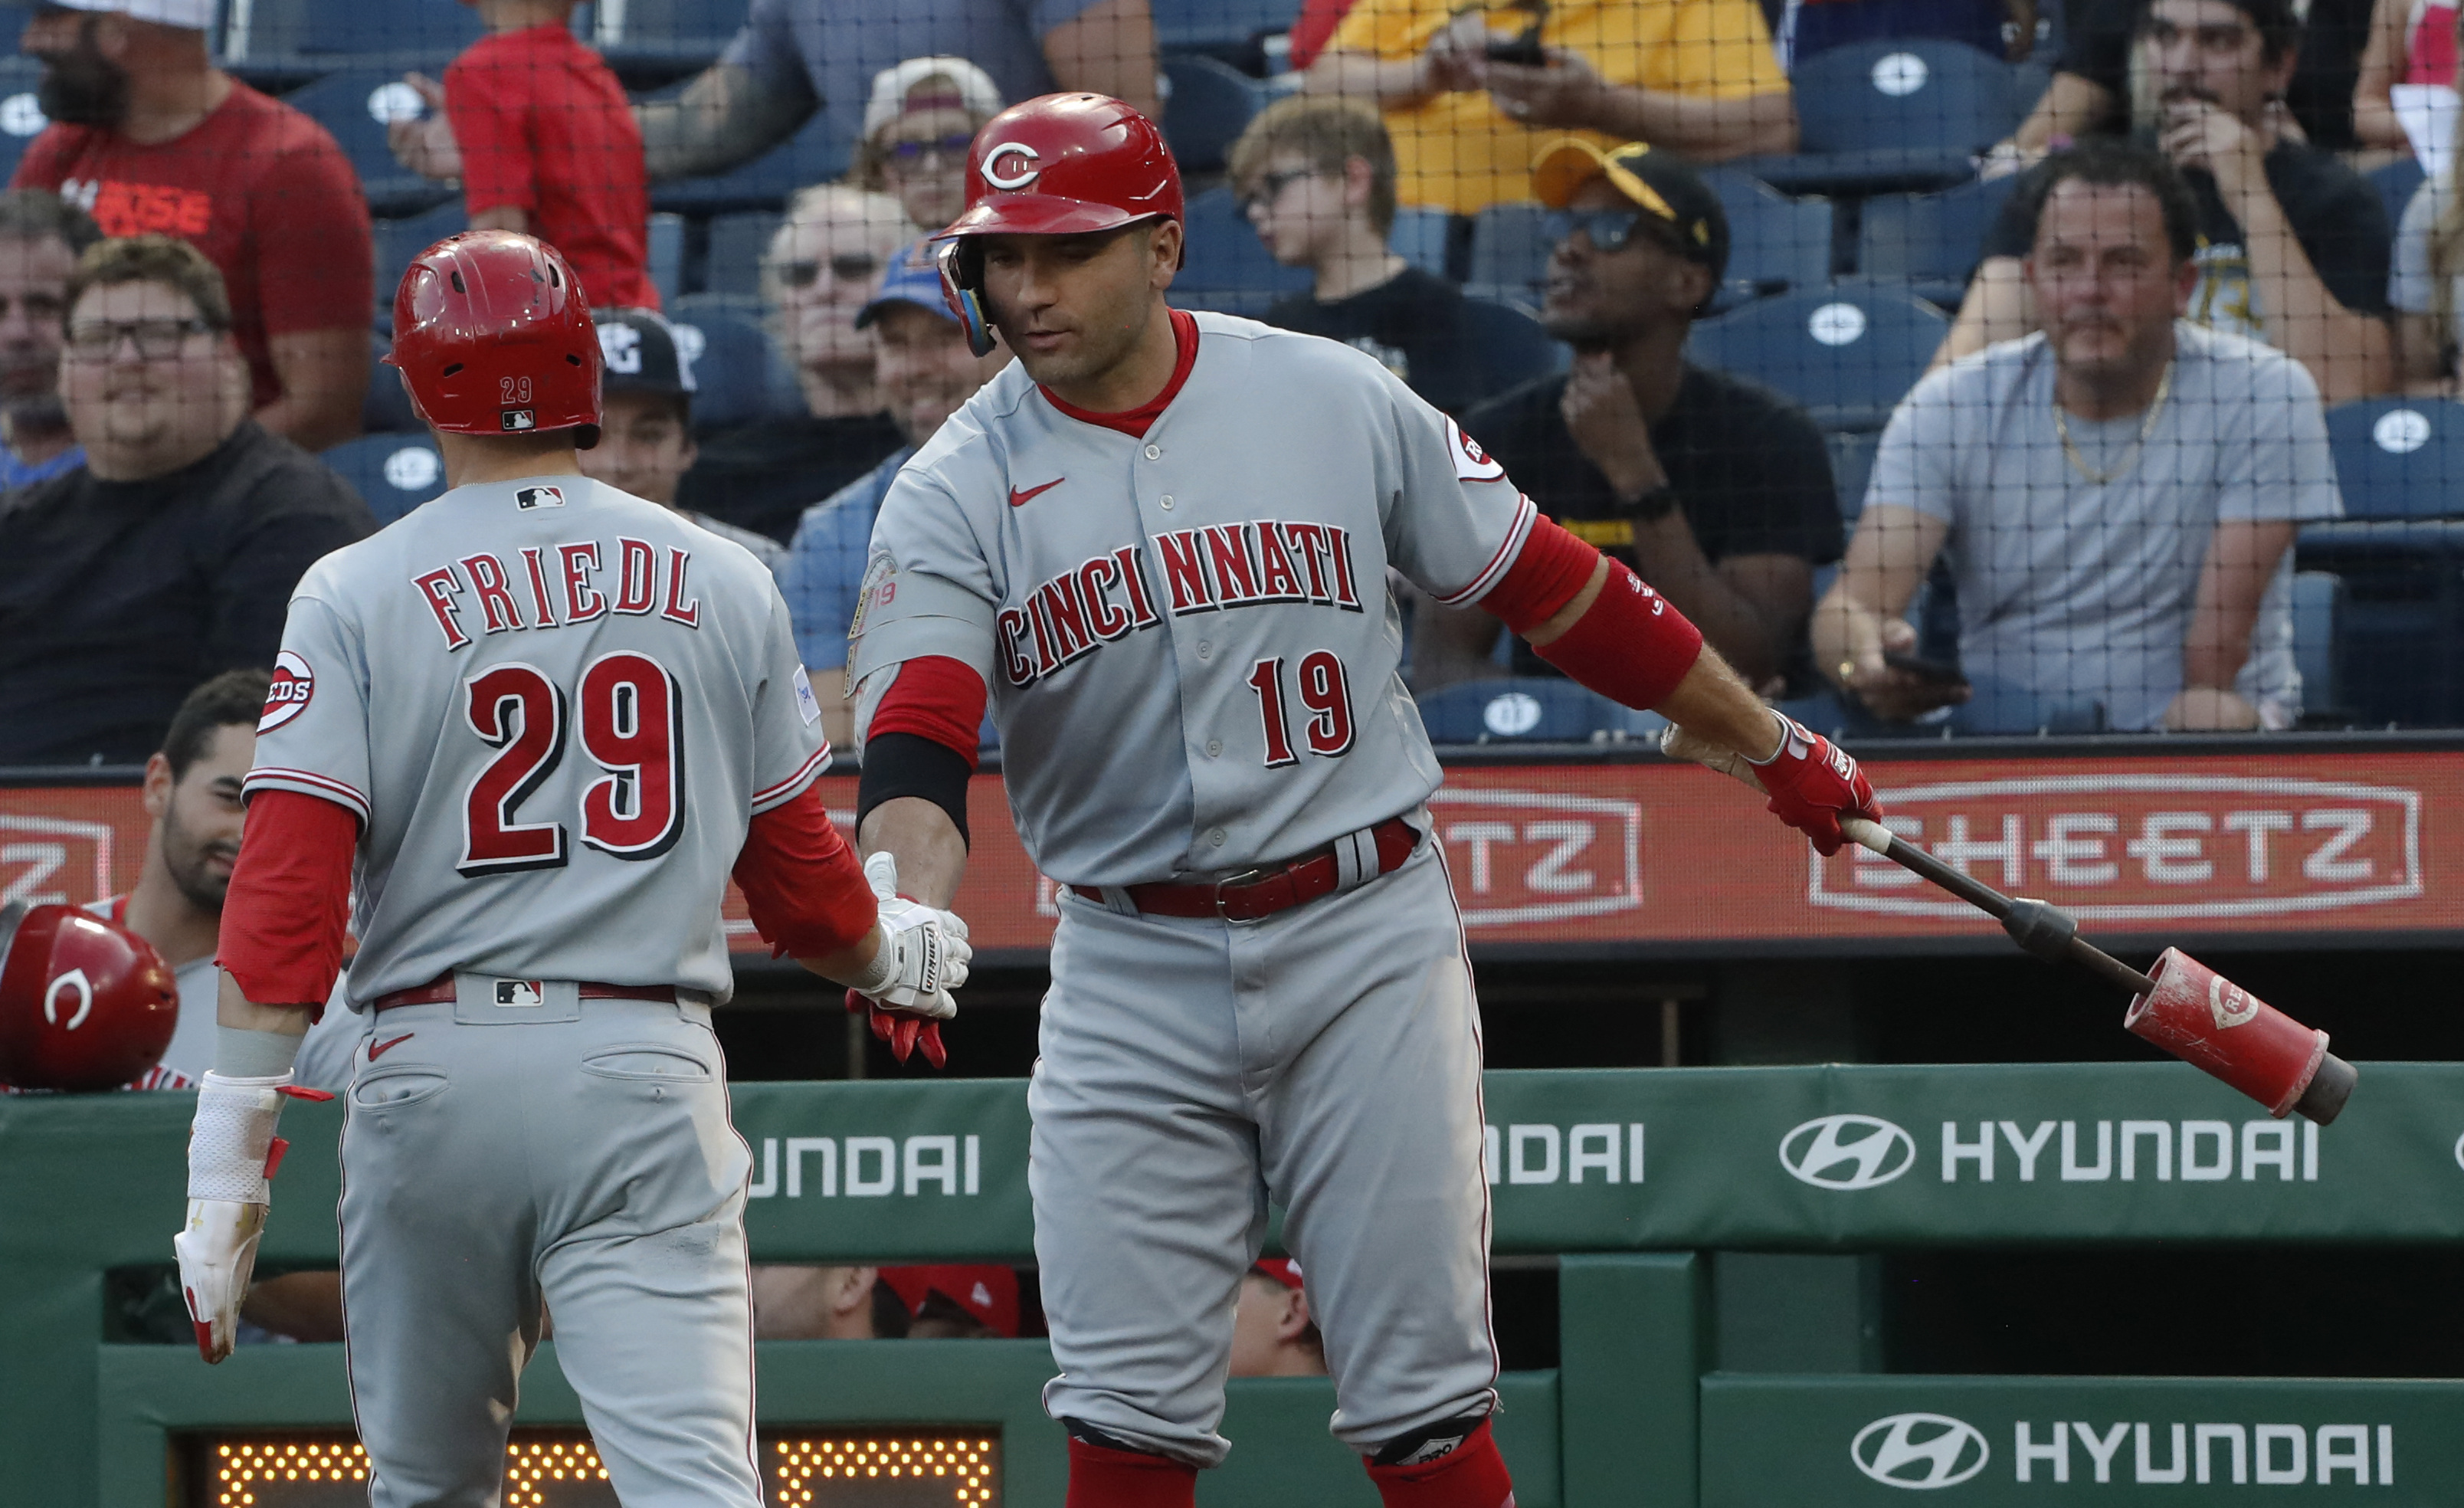 De La Cruz and Maile help the Reds rout the Pirates 9-2 for just their 2nd  win in 9 games - ABC News